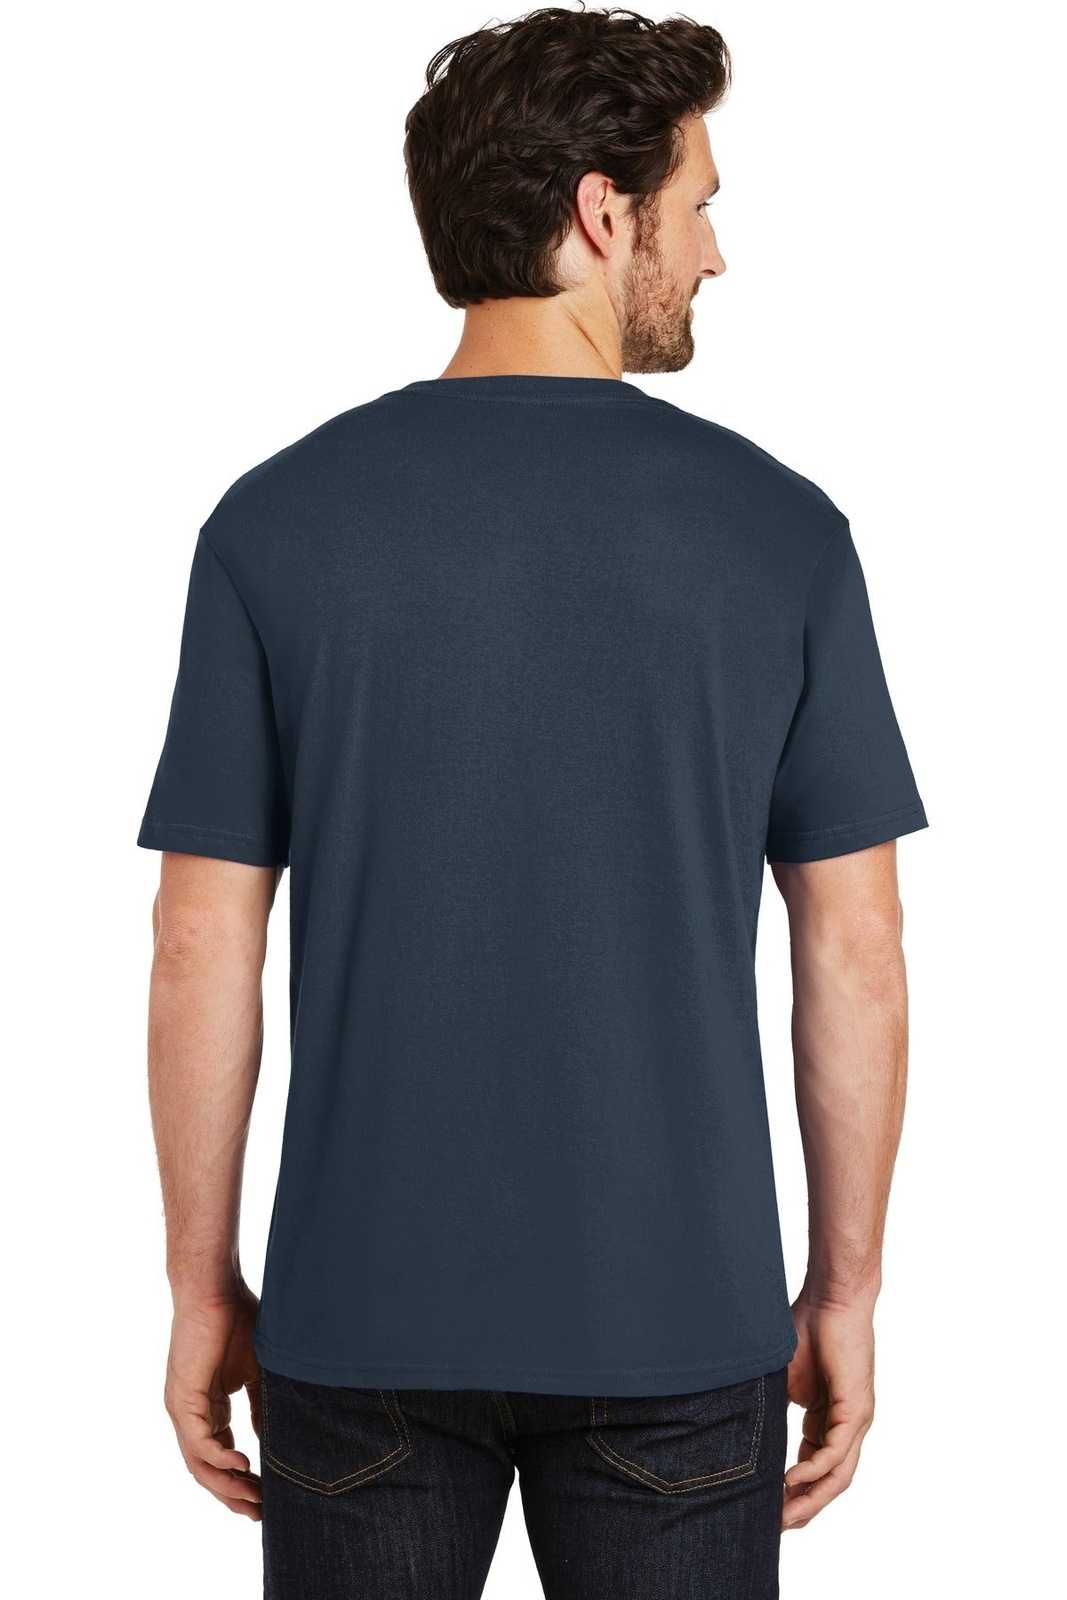 District DT104 Perfect Weight Tee - New Navy - HIT a Double - 2